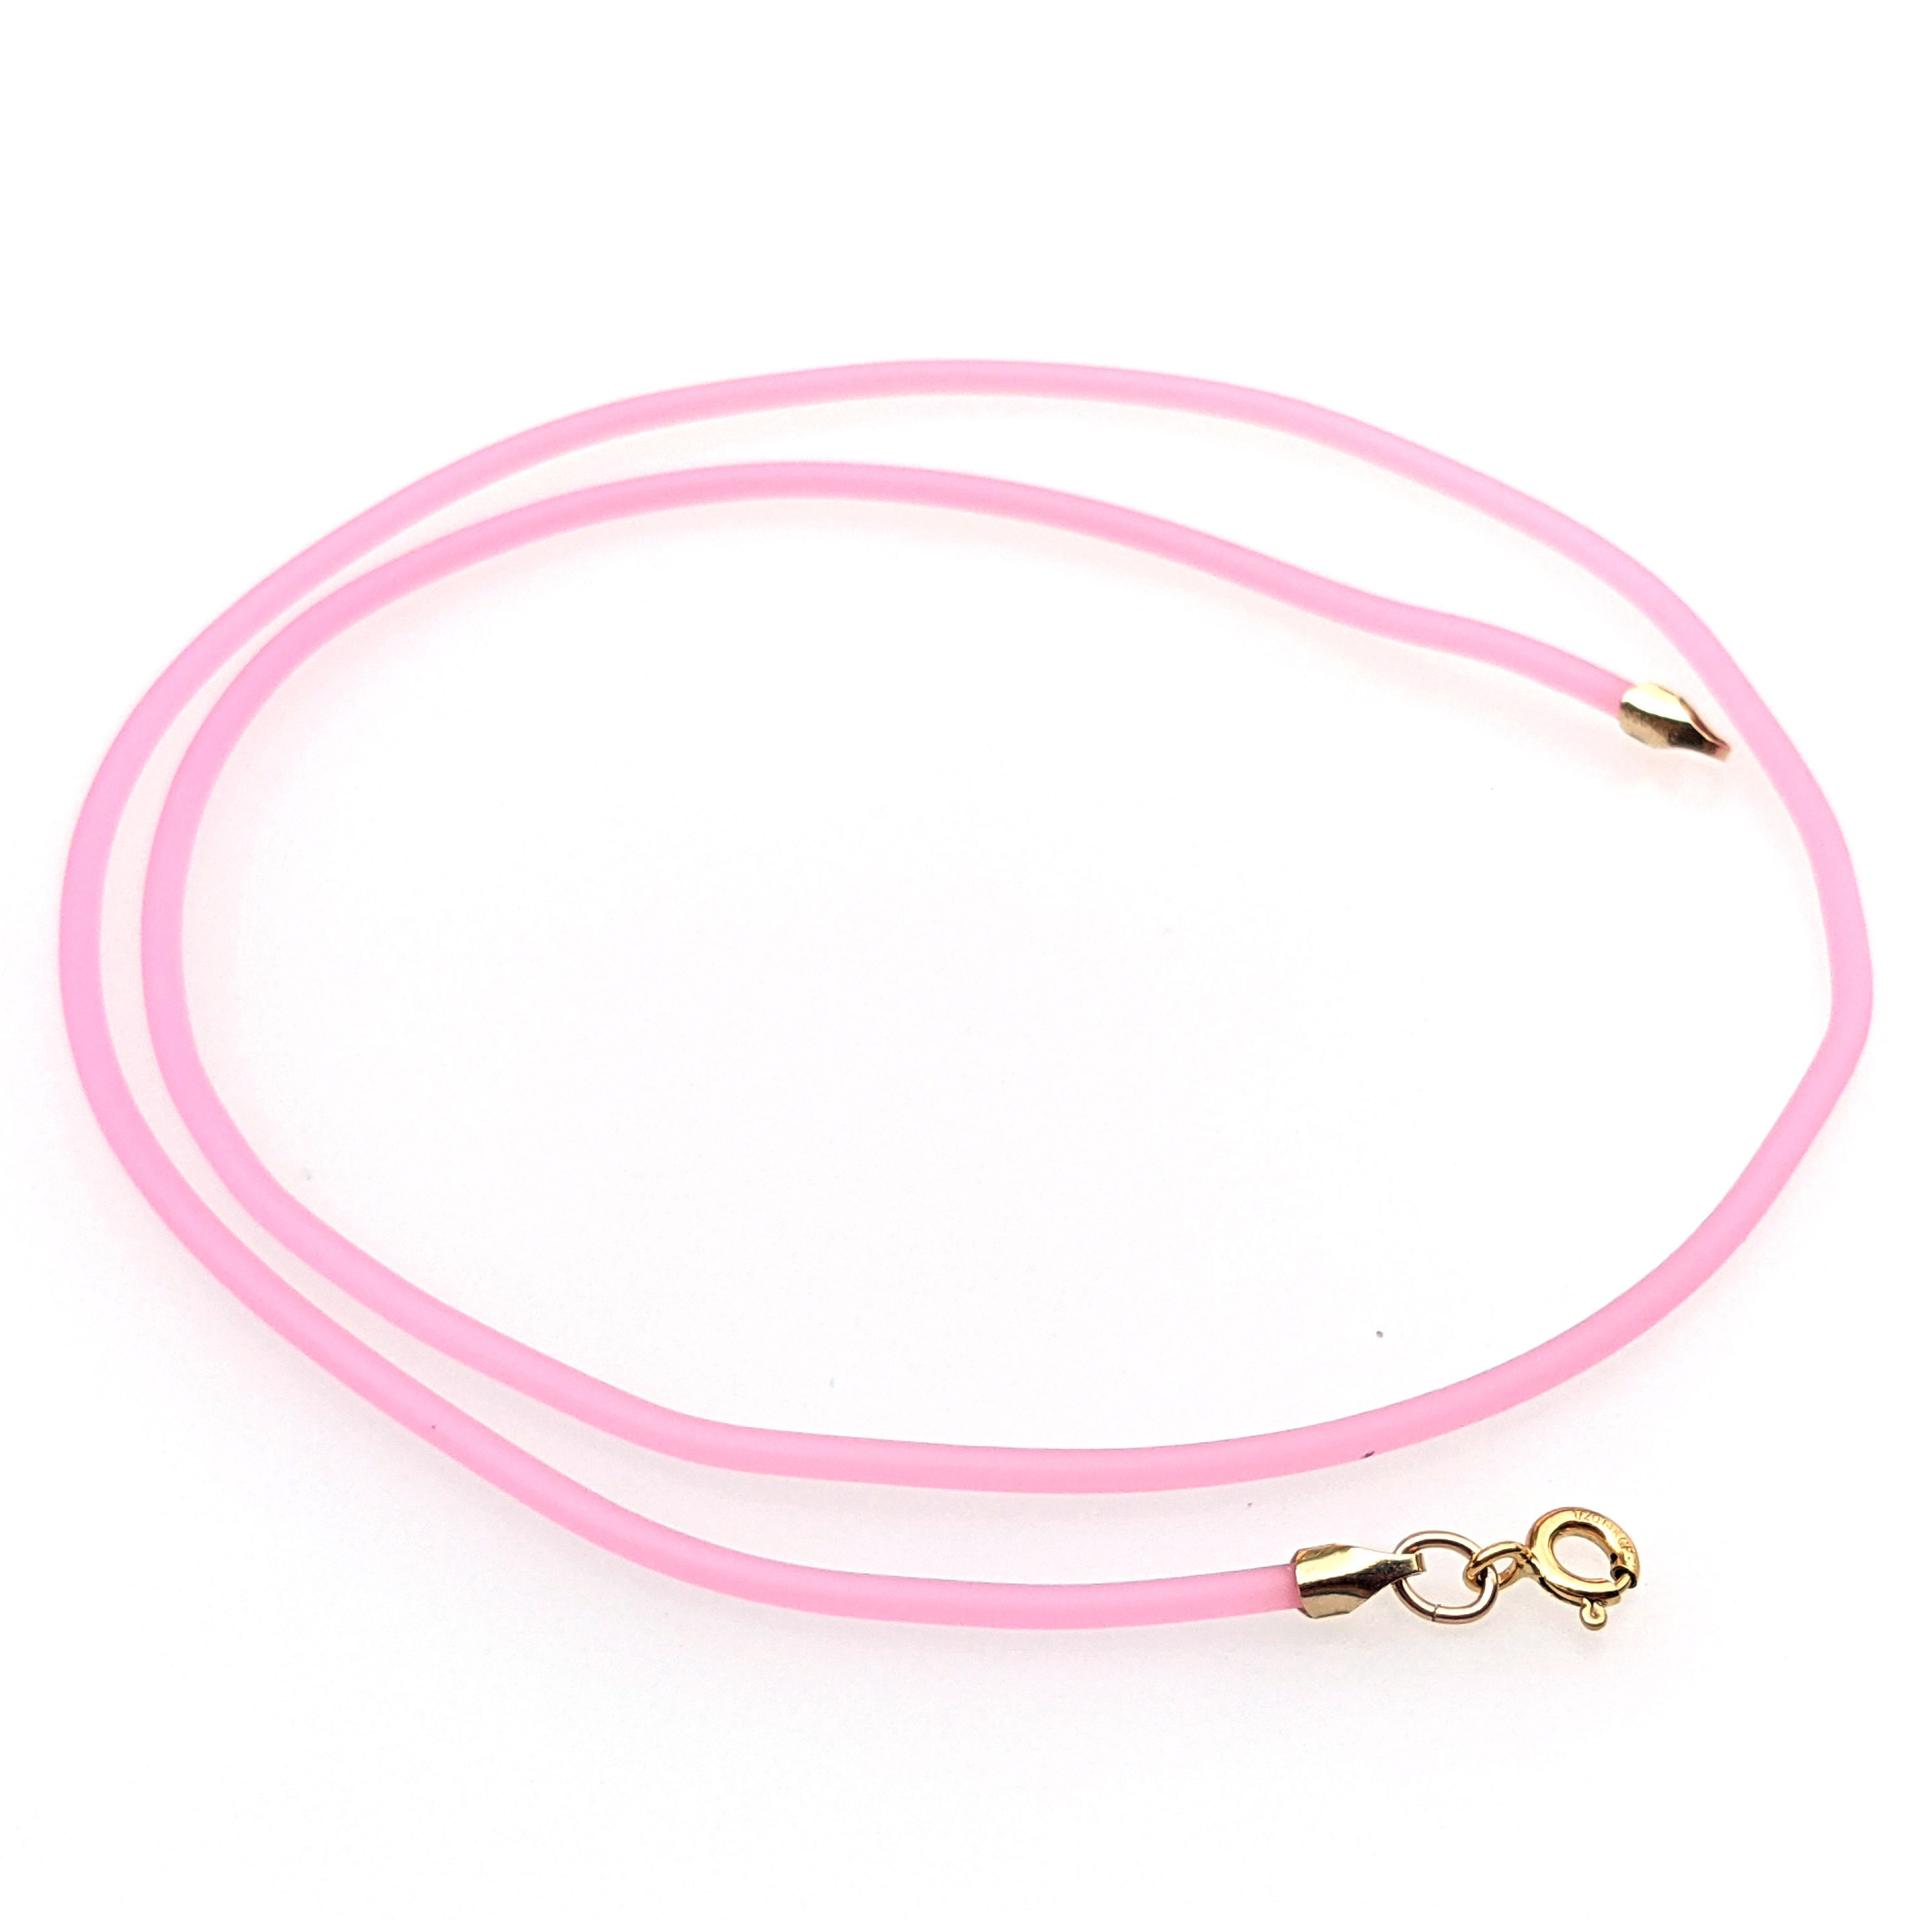 Pink Rubber Cord Necklace, Cotton Candy, 2 mm, Gold Filled Clasp, Interchangeable, 16", 18", 20", 22", 24"